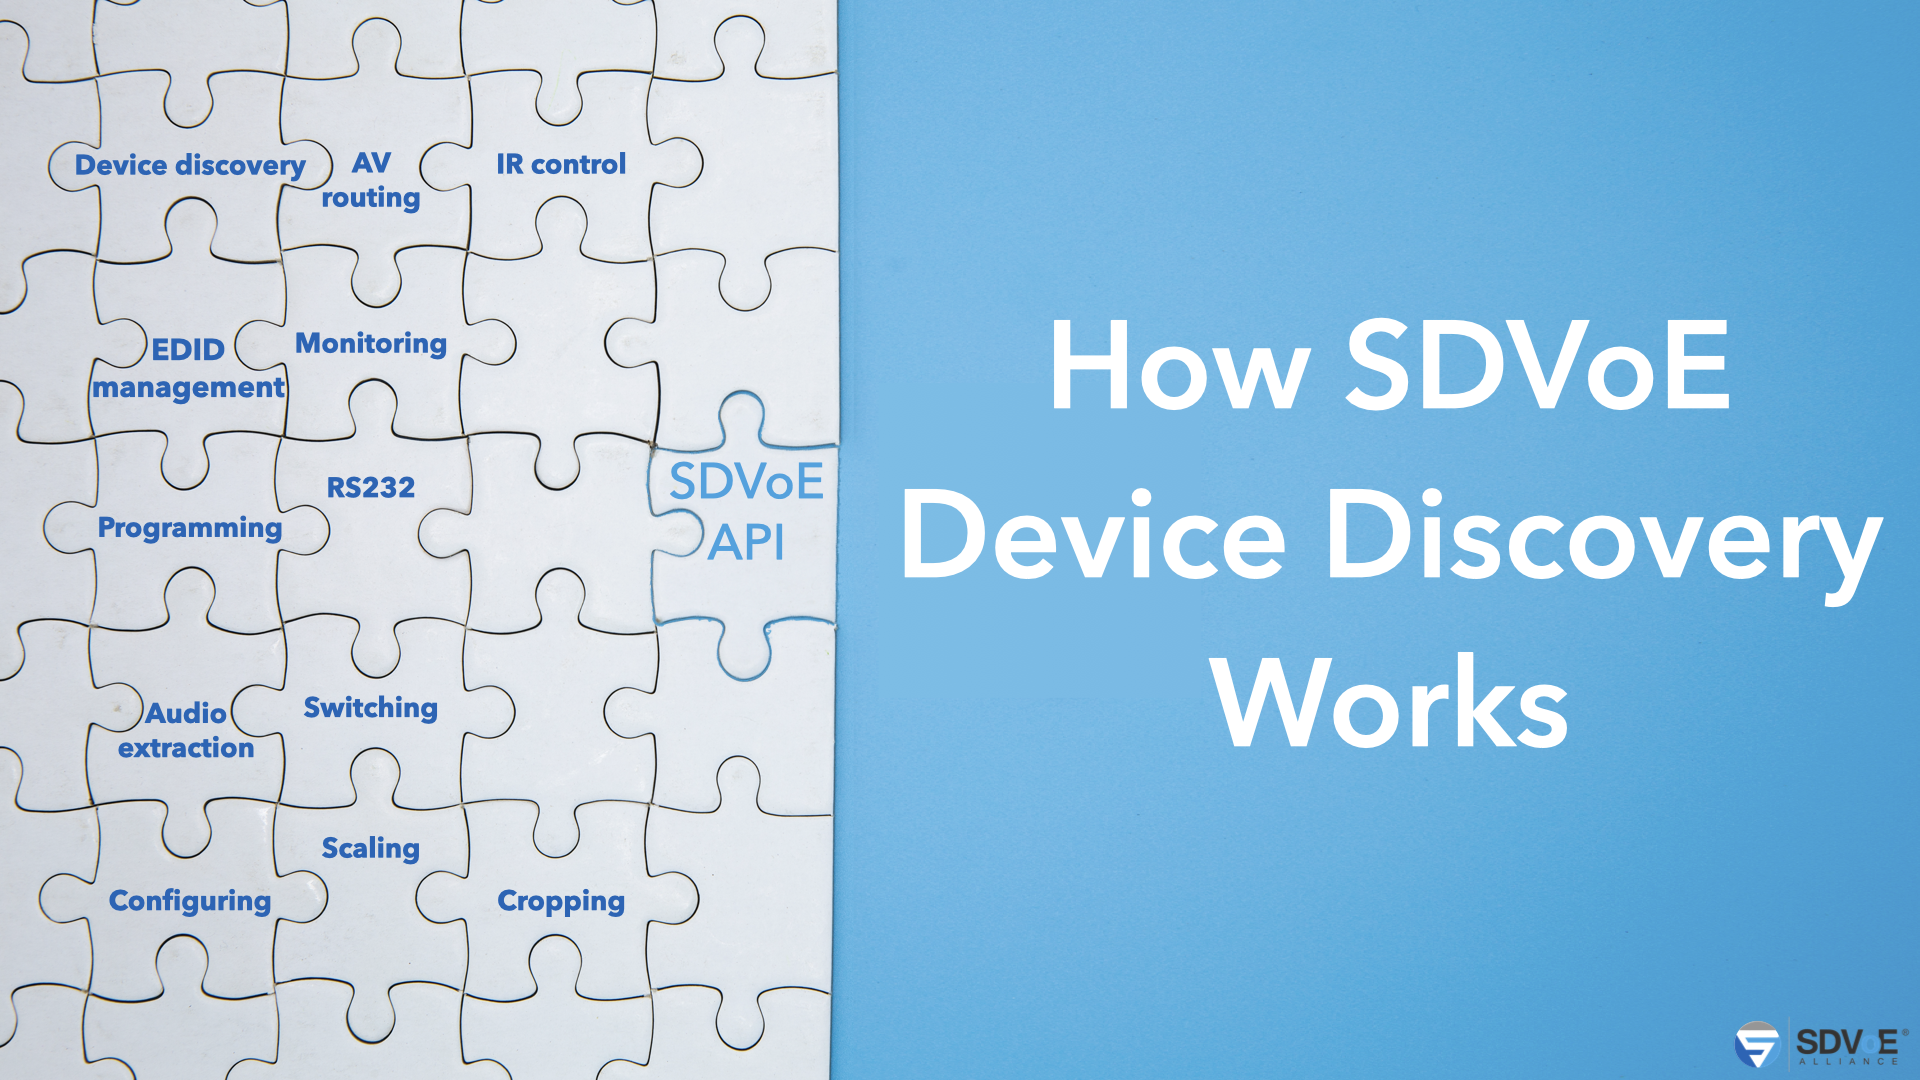 How SDVoE Device Discovery Works